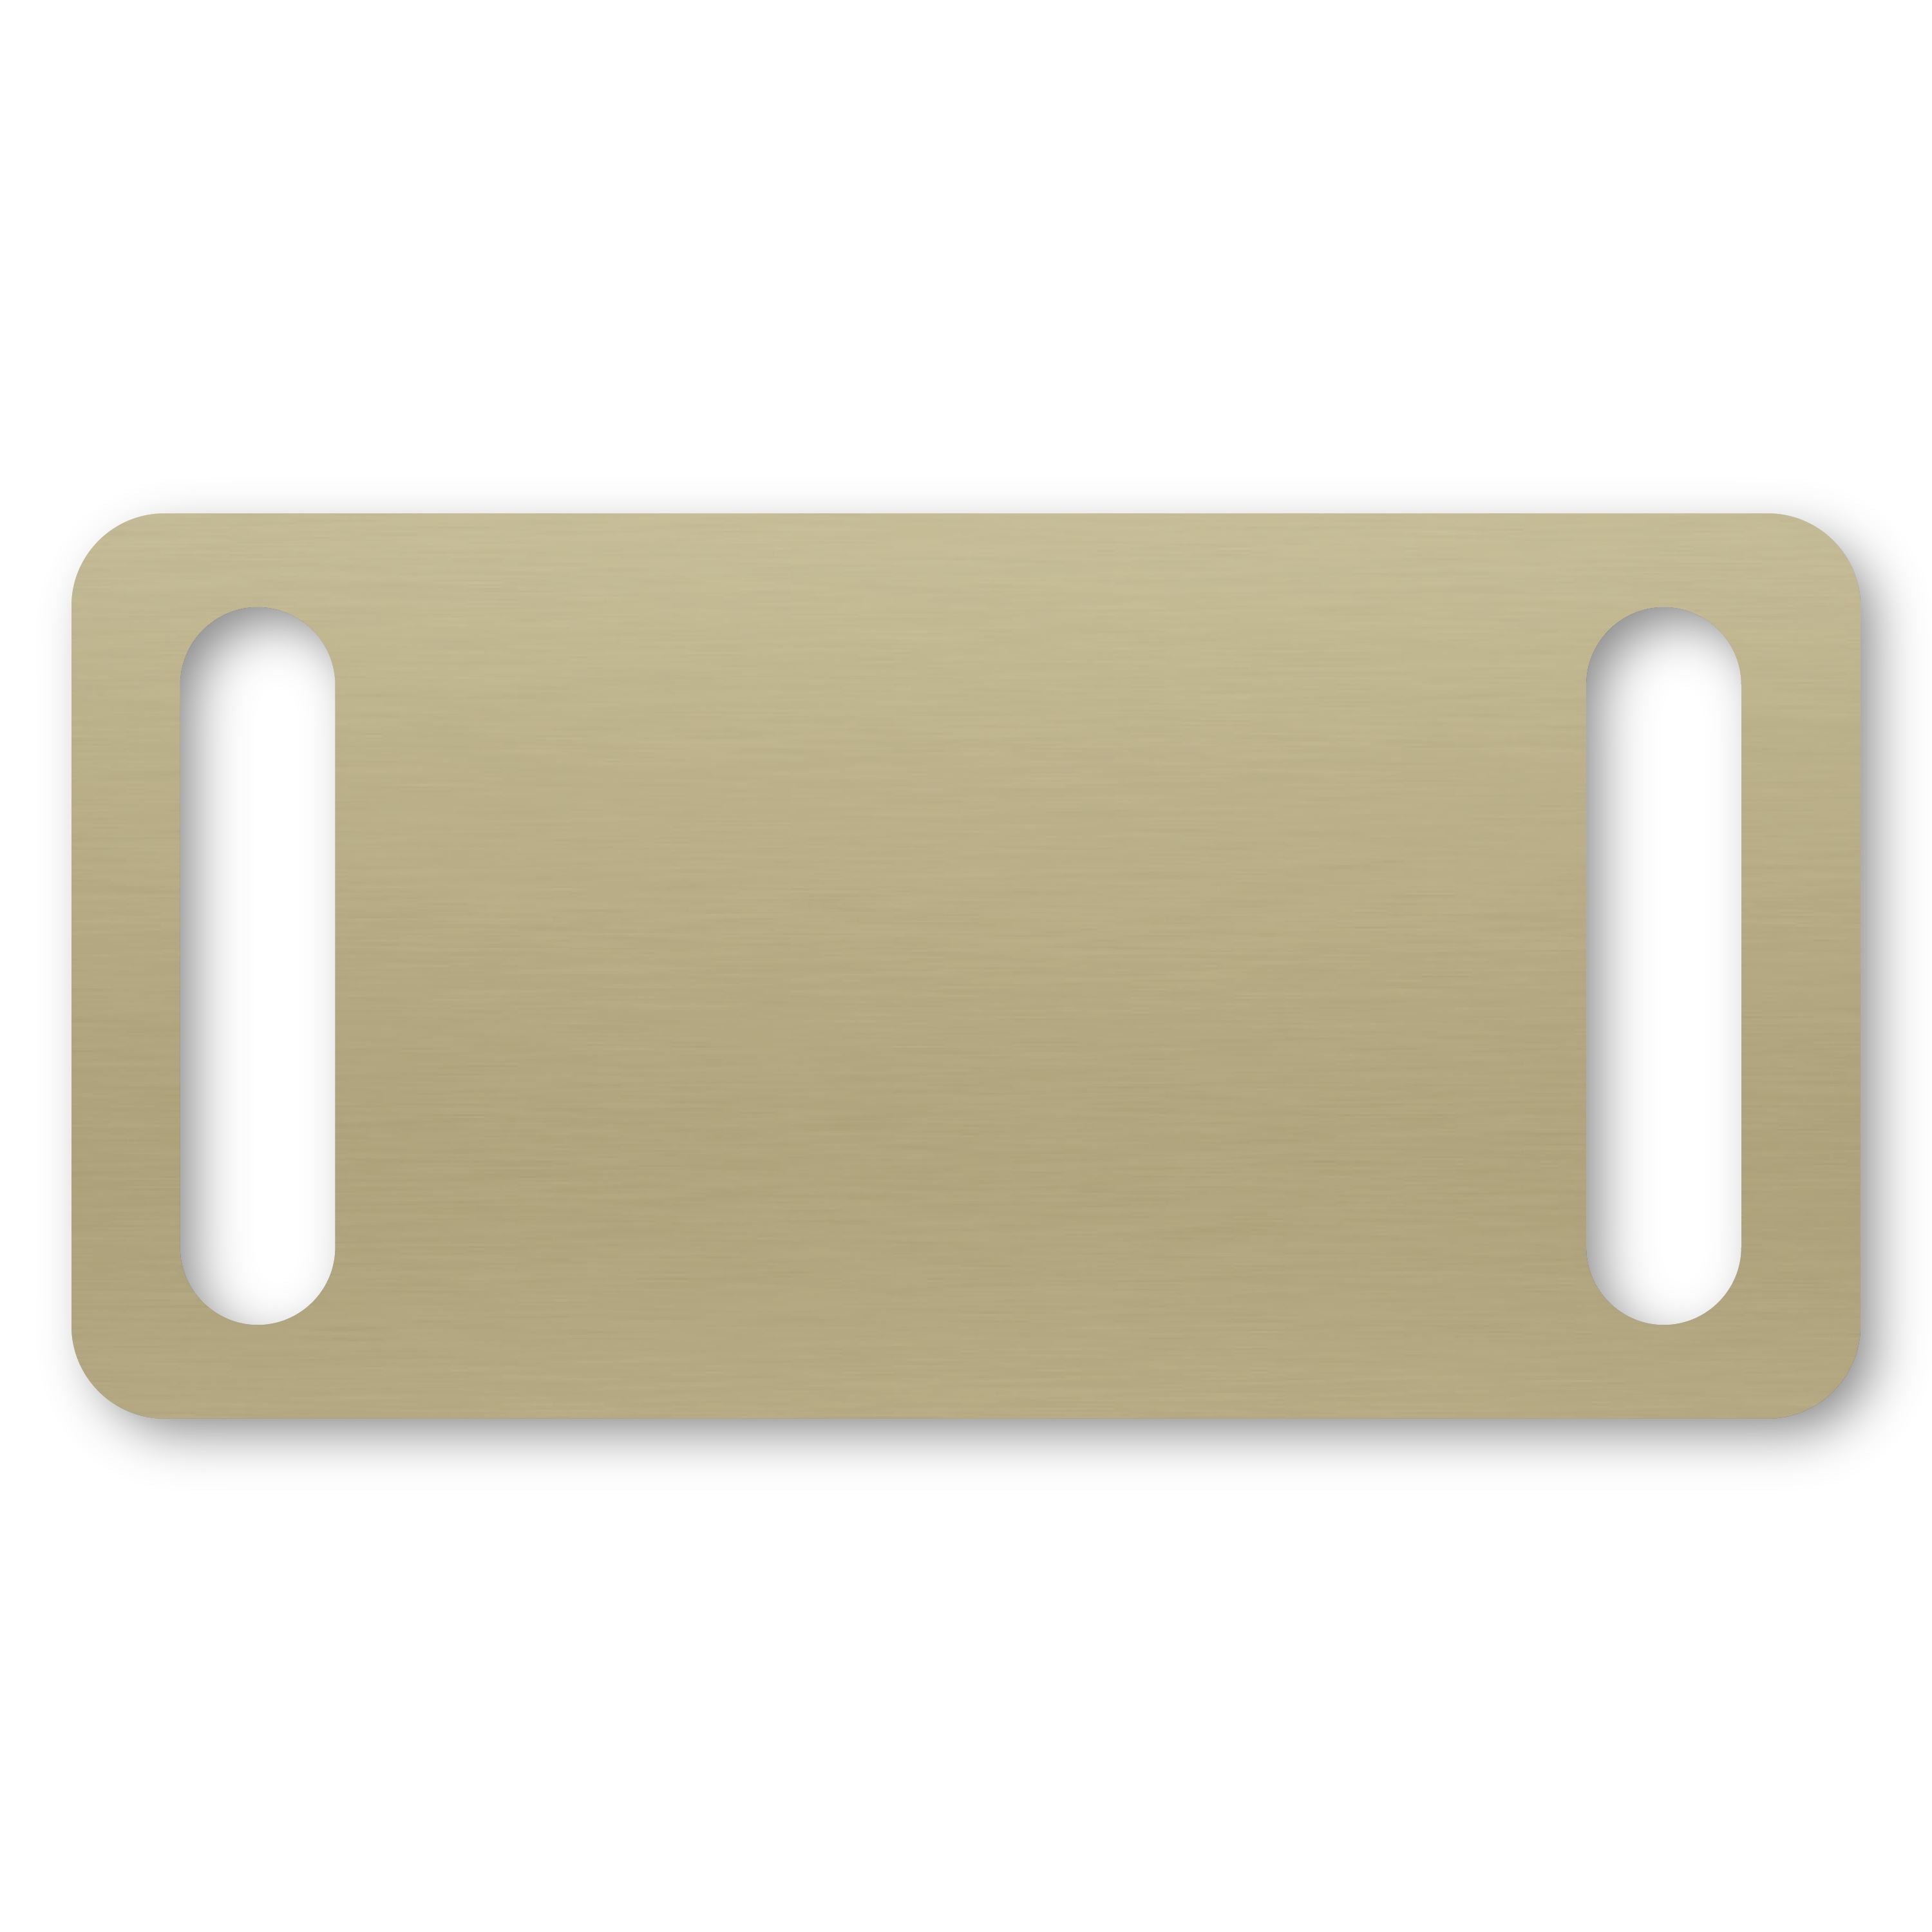 Anodized Aluminum Rectangle Slide-On Tags, 7/8" x 1-3/4" with 5/32" x 3/4" Slot, Laser Engraved Metal Tags Craftworks NW Gold 